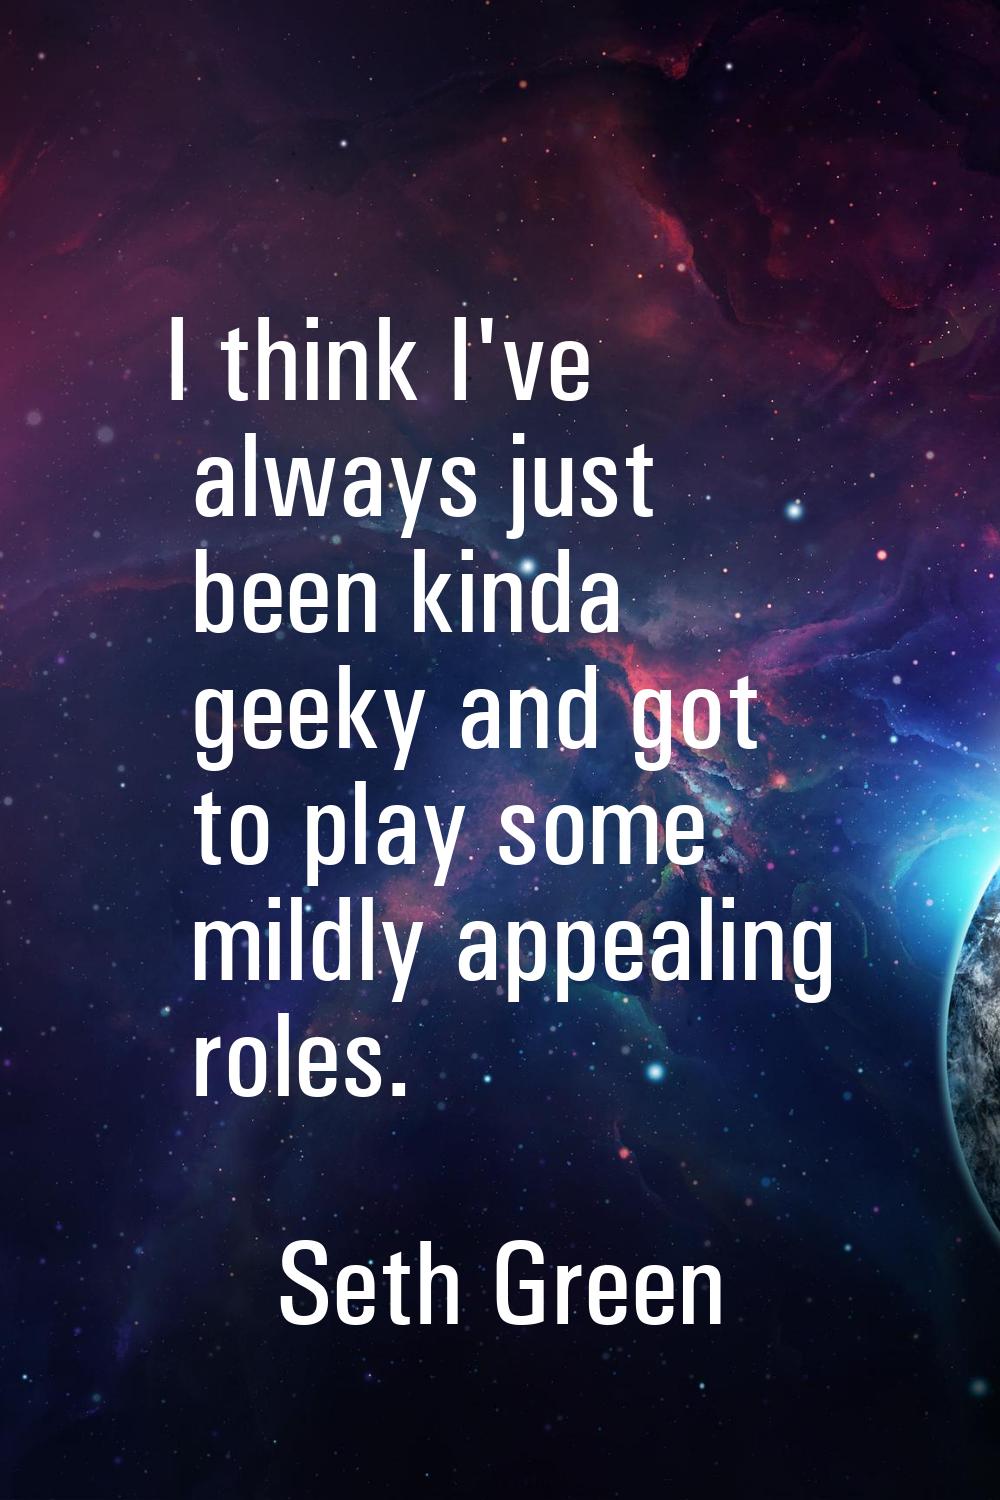 I think I've always just been kinda geeky and got to play some mildly appealing roles.